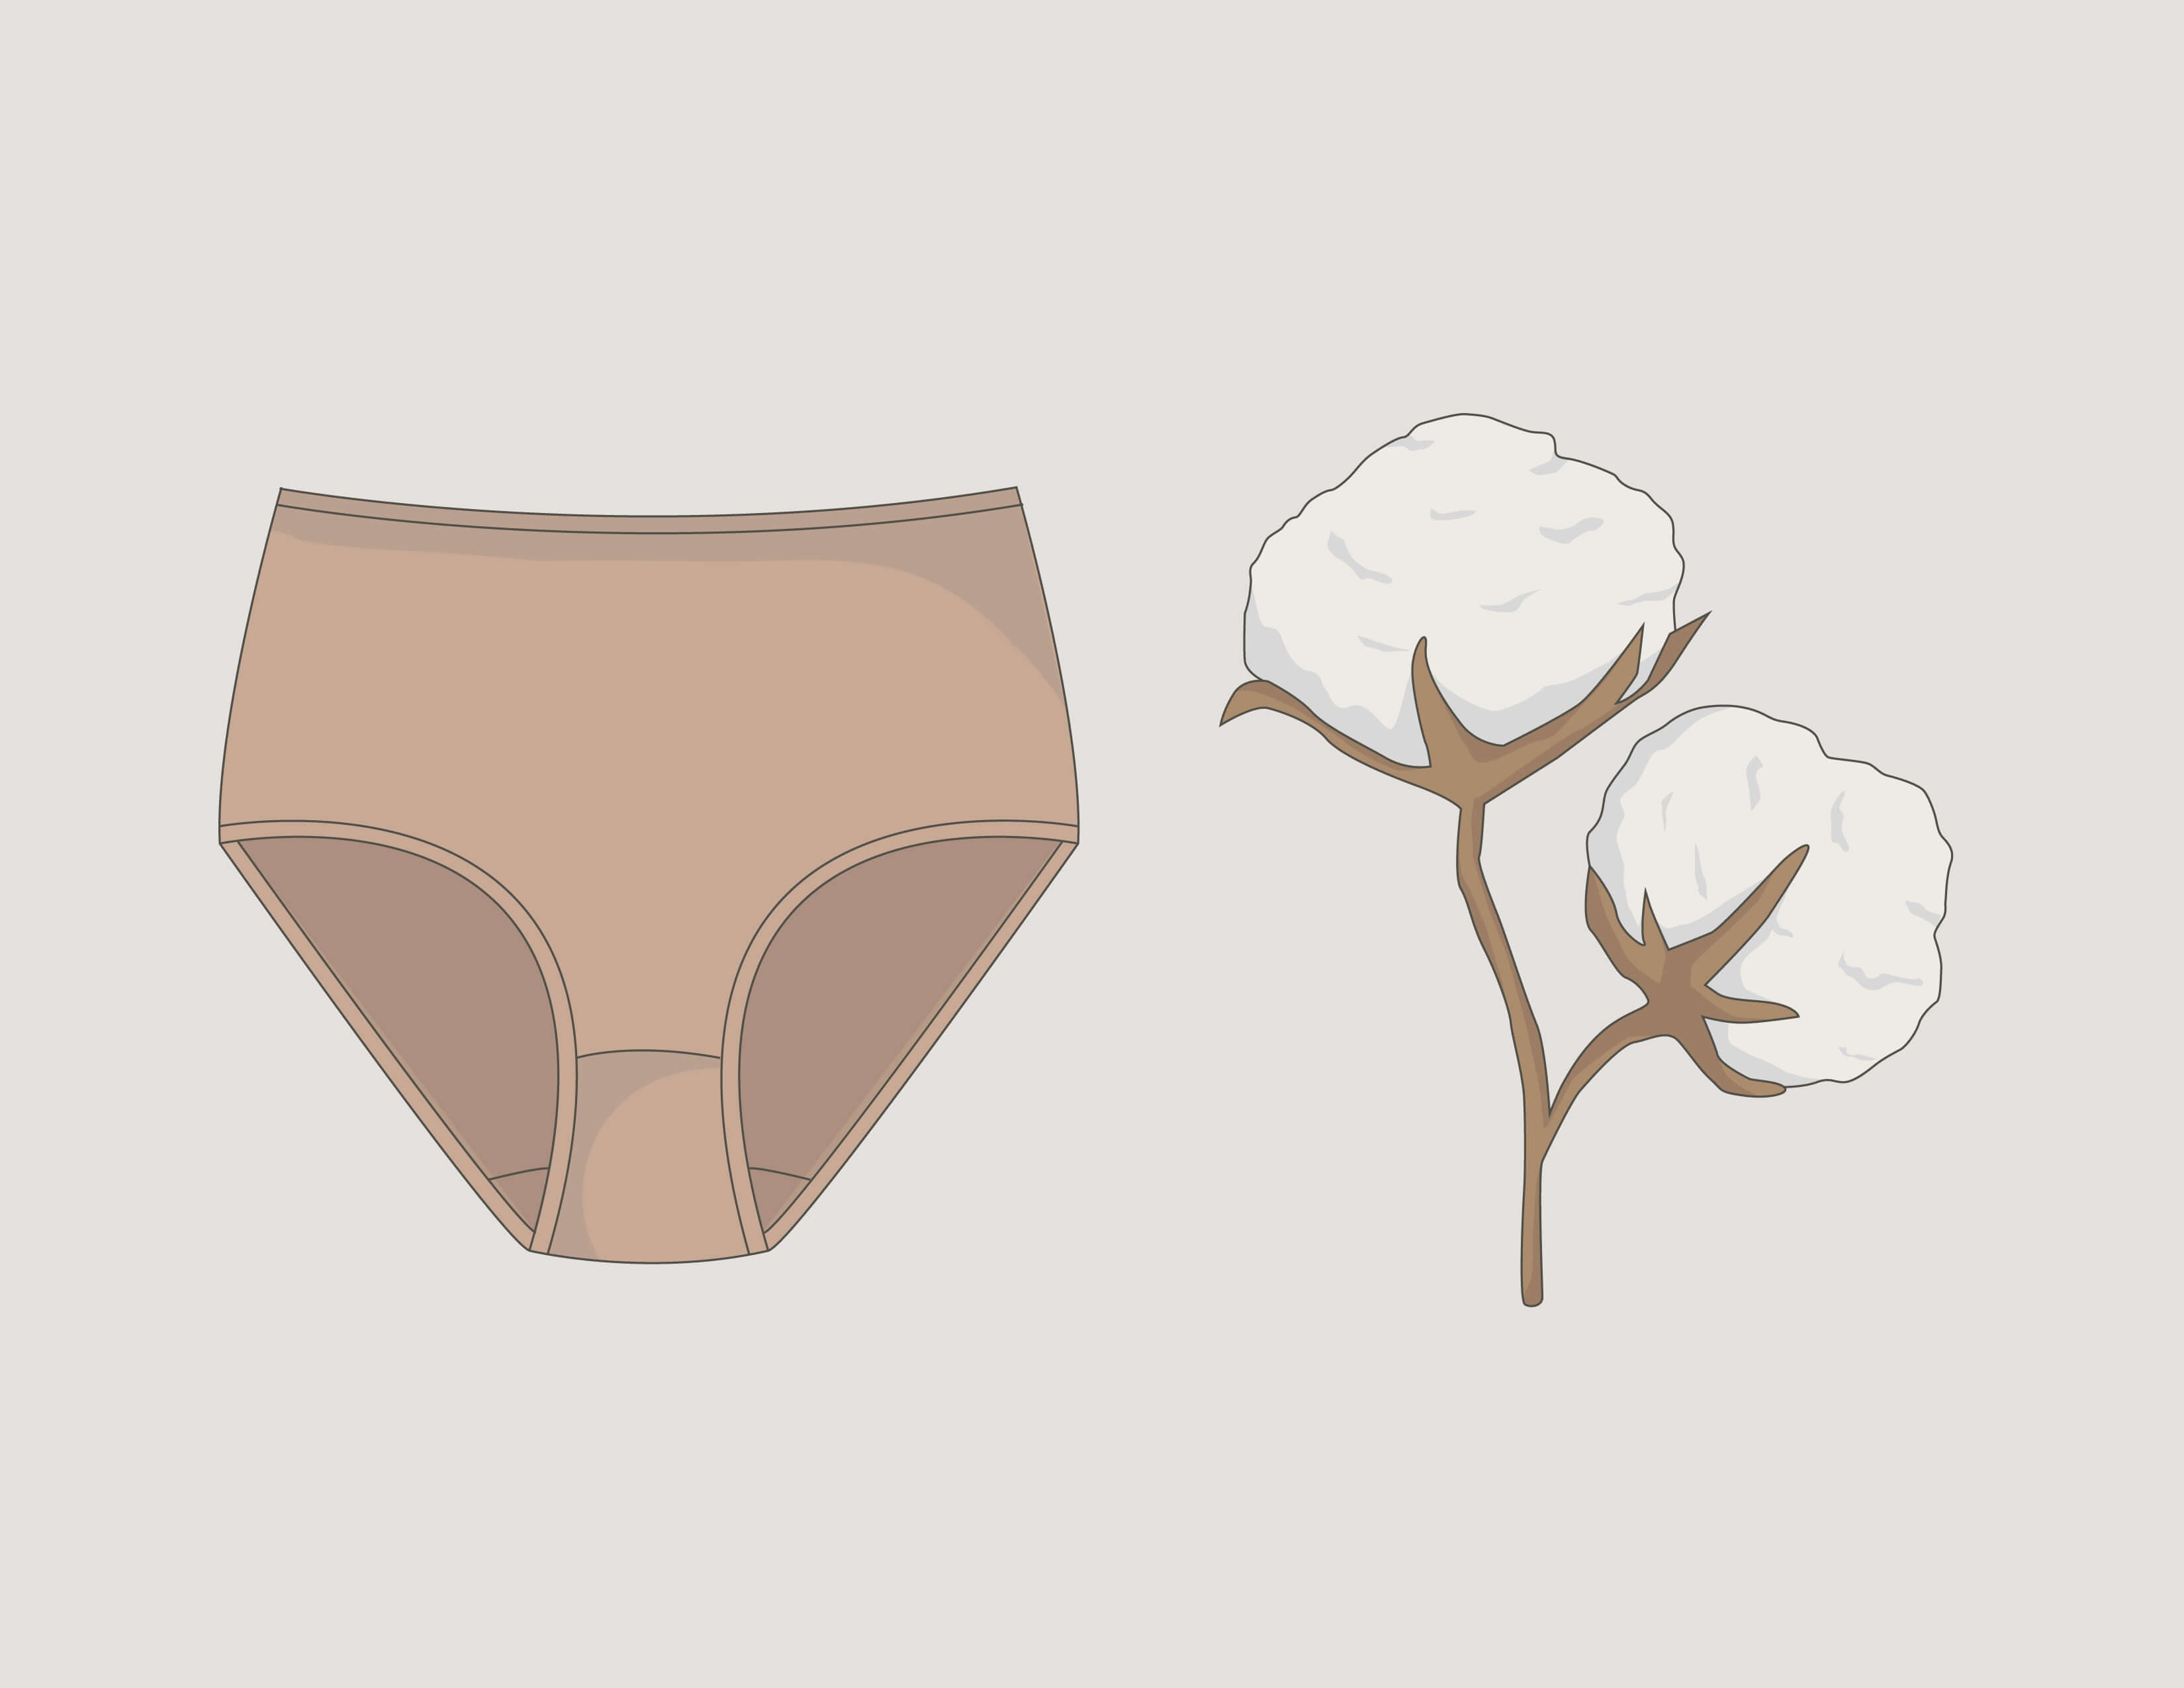 The Color Of Underwear That Works Best Under White Clothing